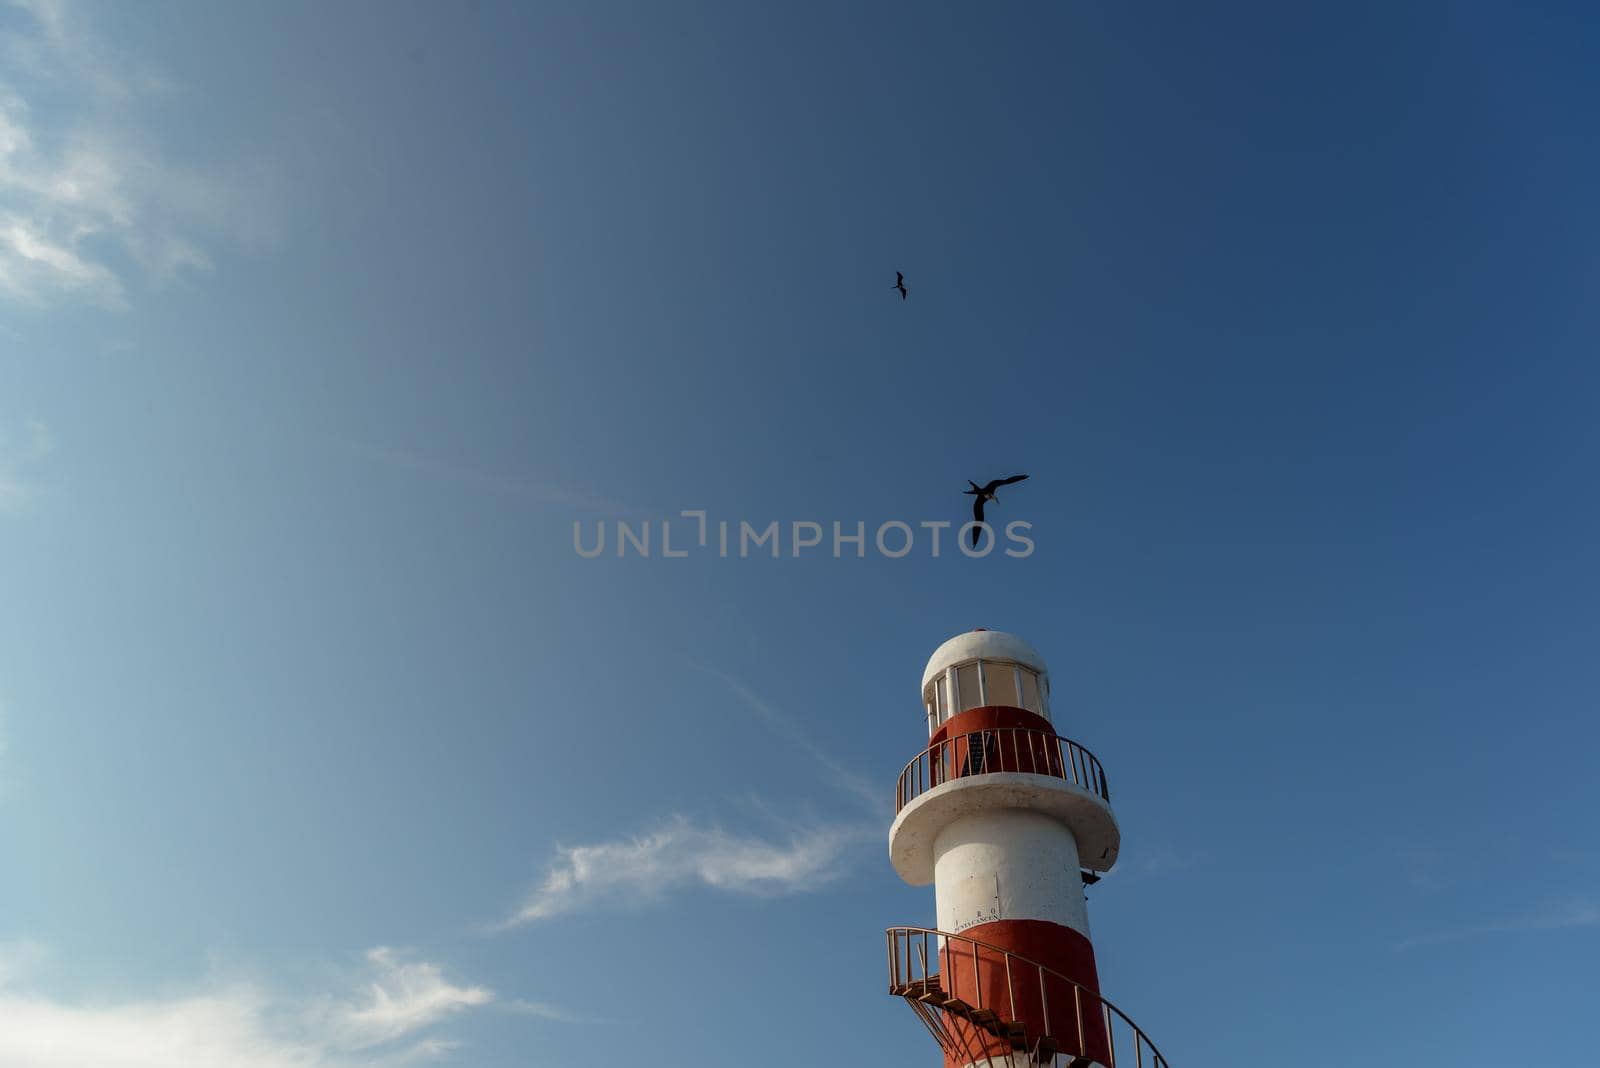 Top of a white-red lighthouse against a blue sky with an airplane. Mexico.